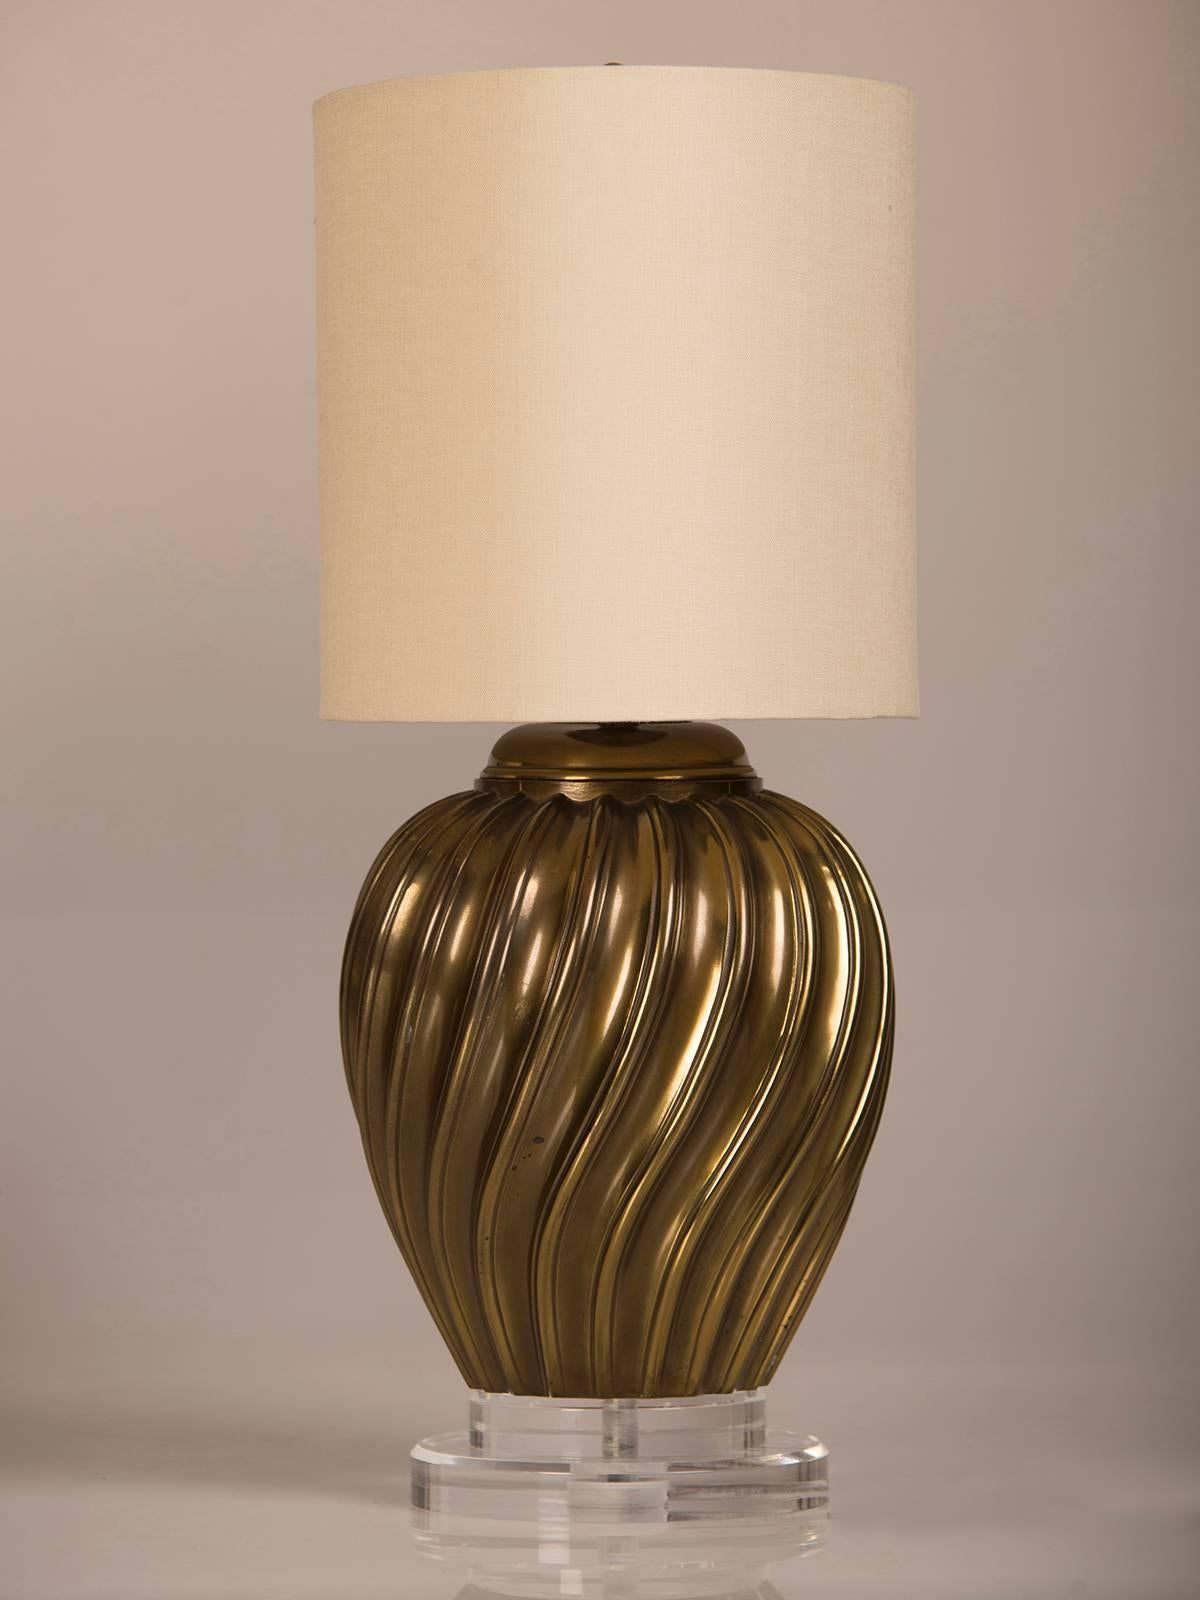 Pair of Italian Vintage Brass Swirl Vases Mounted as Custom Lamps, circa 1950 In Excellent Condition For Sale In Houston, TX